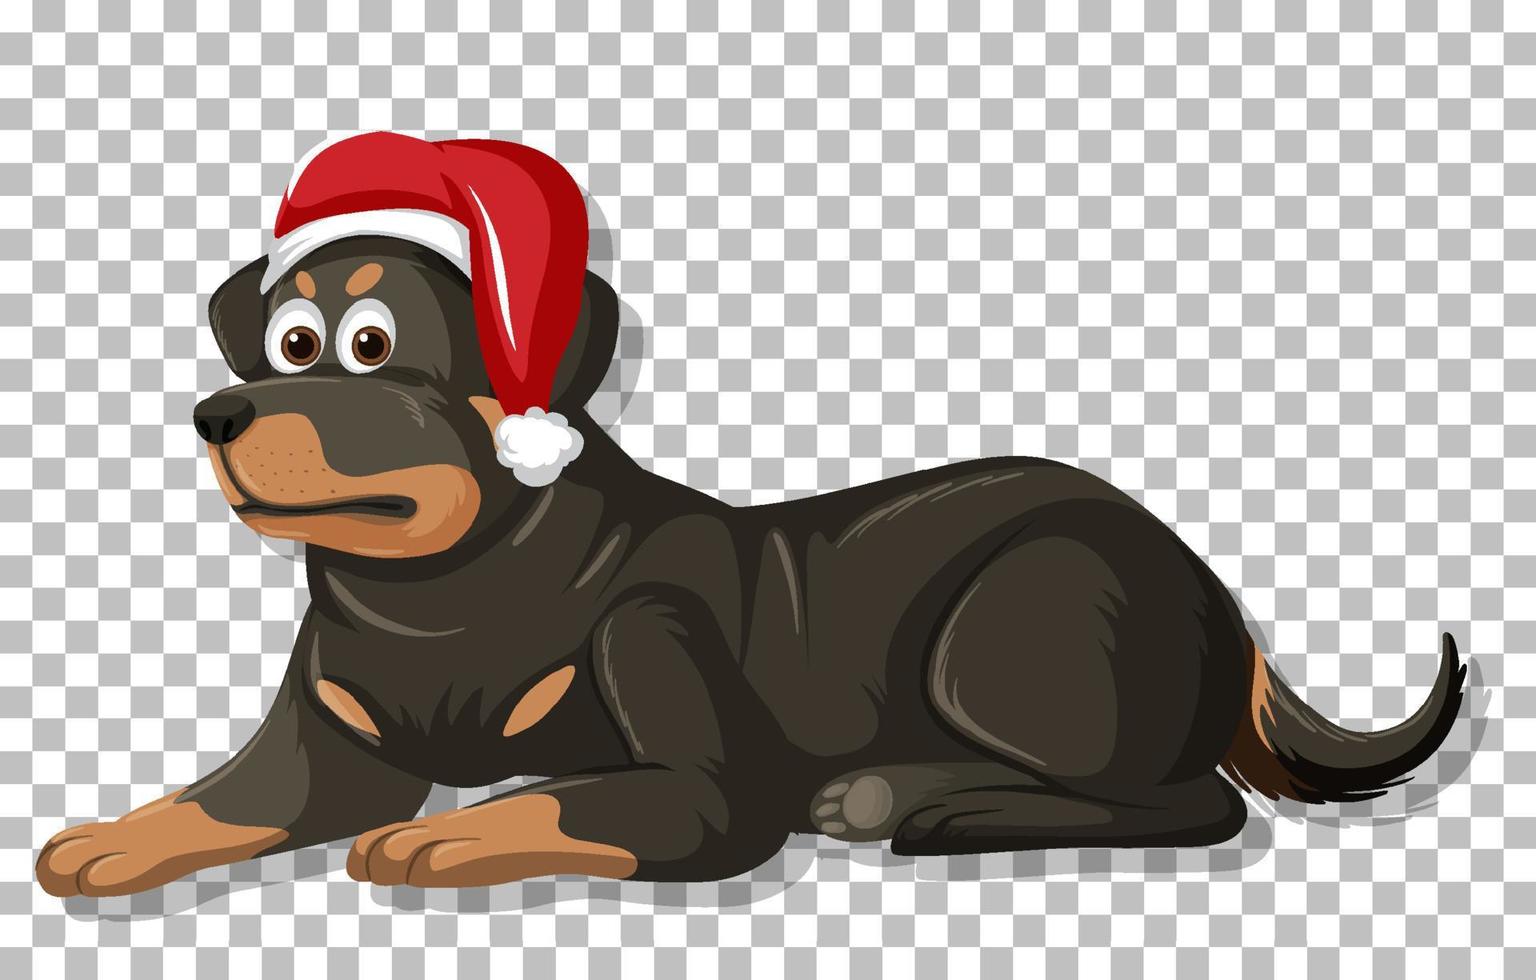 Cute dog on grid background vector